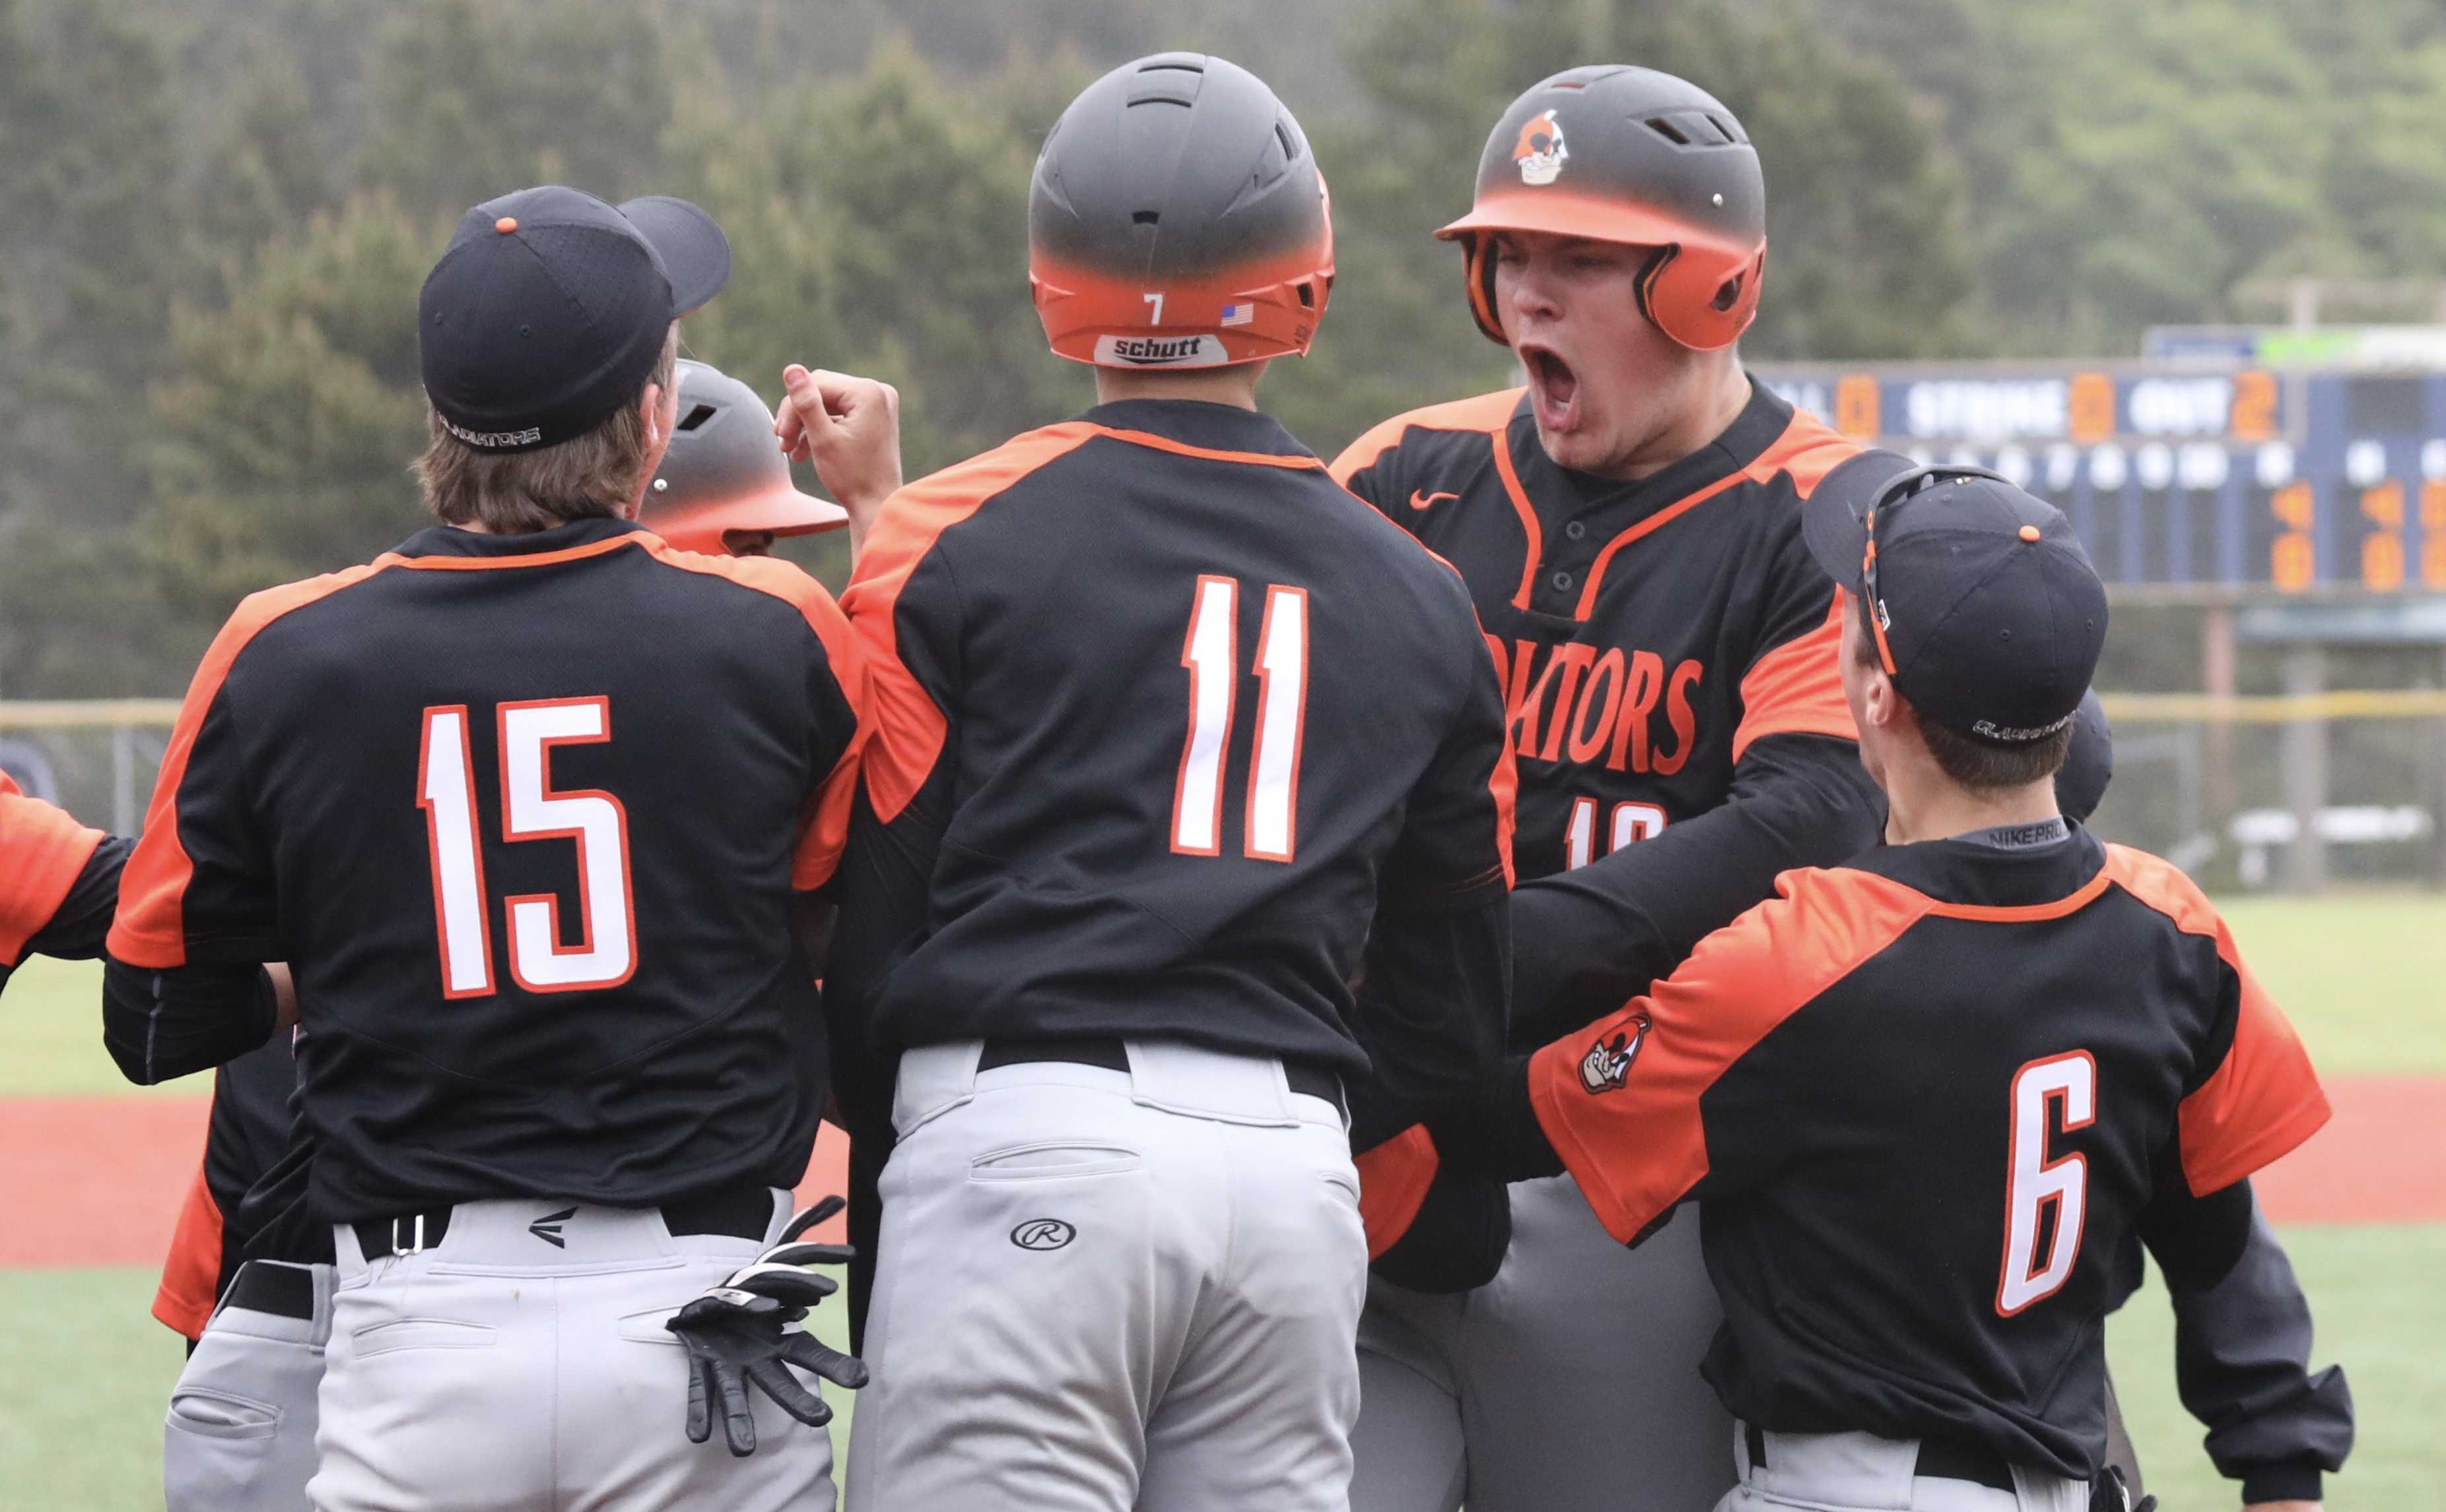 Gladstone's Jackson Simmons, facing camera, celebrates his first-inning home run with his teammates (Norm Maves Jr.)